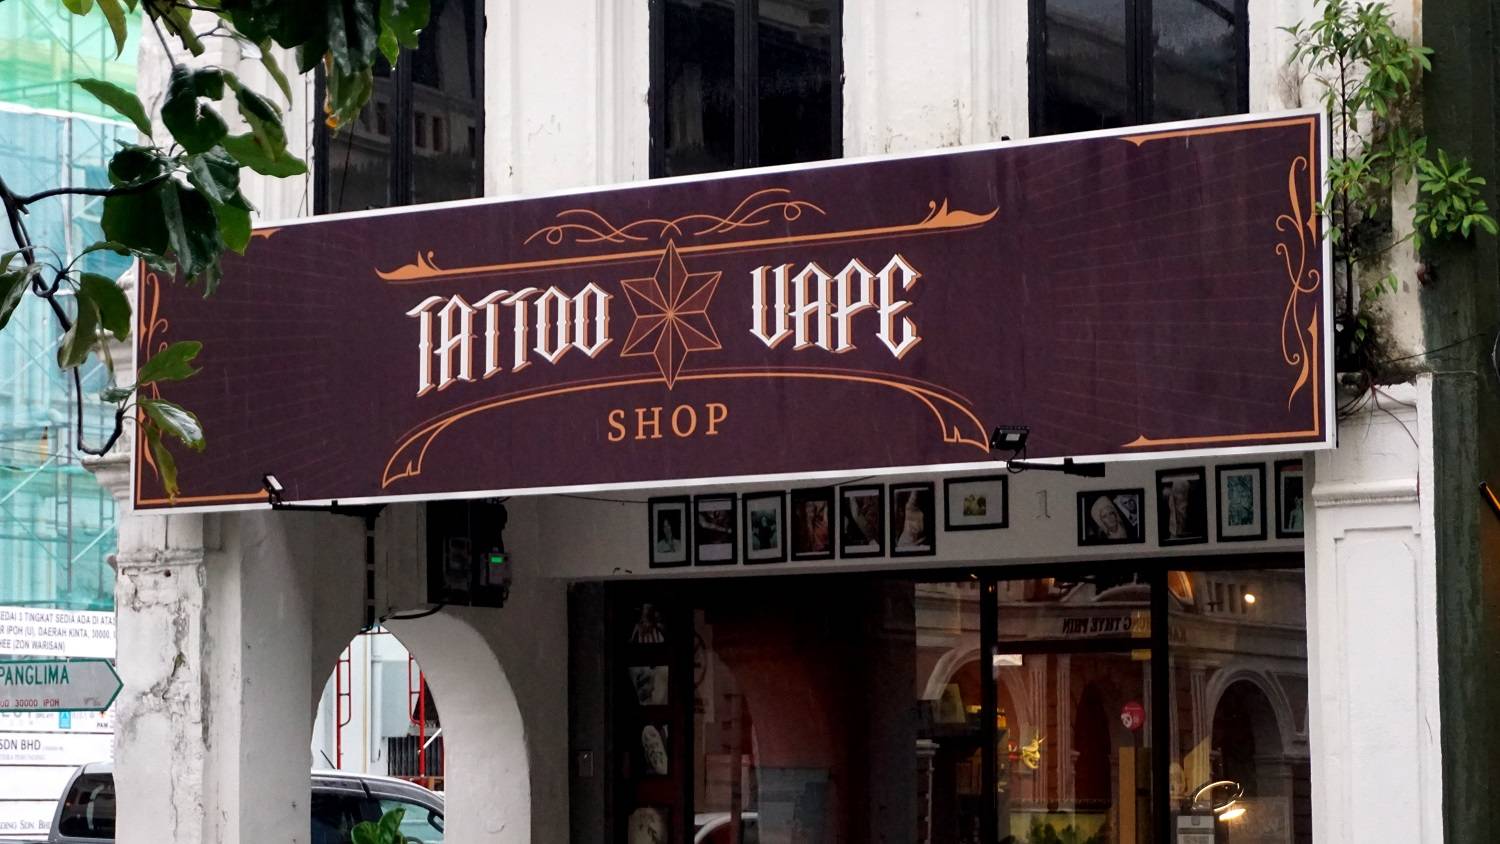 An ’in’ thing... Vape shops! Right across the Parisian diner